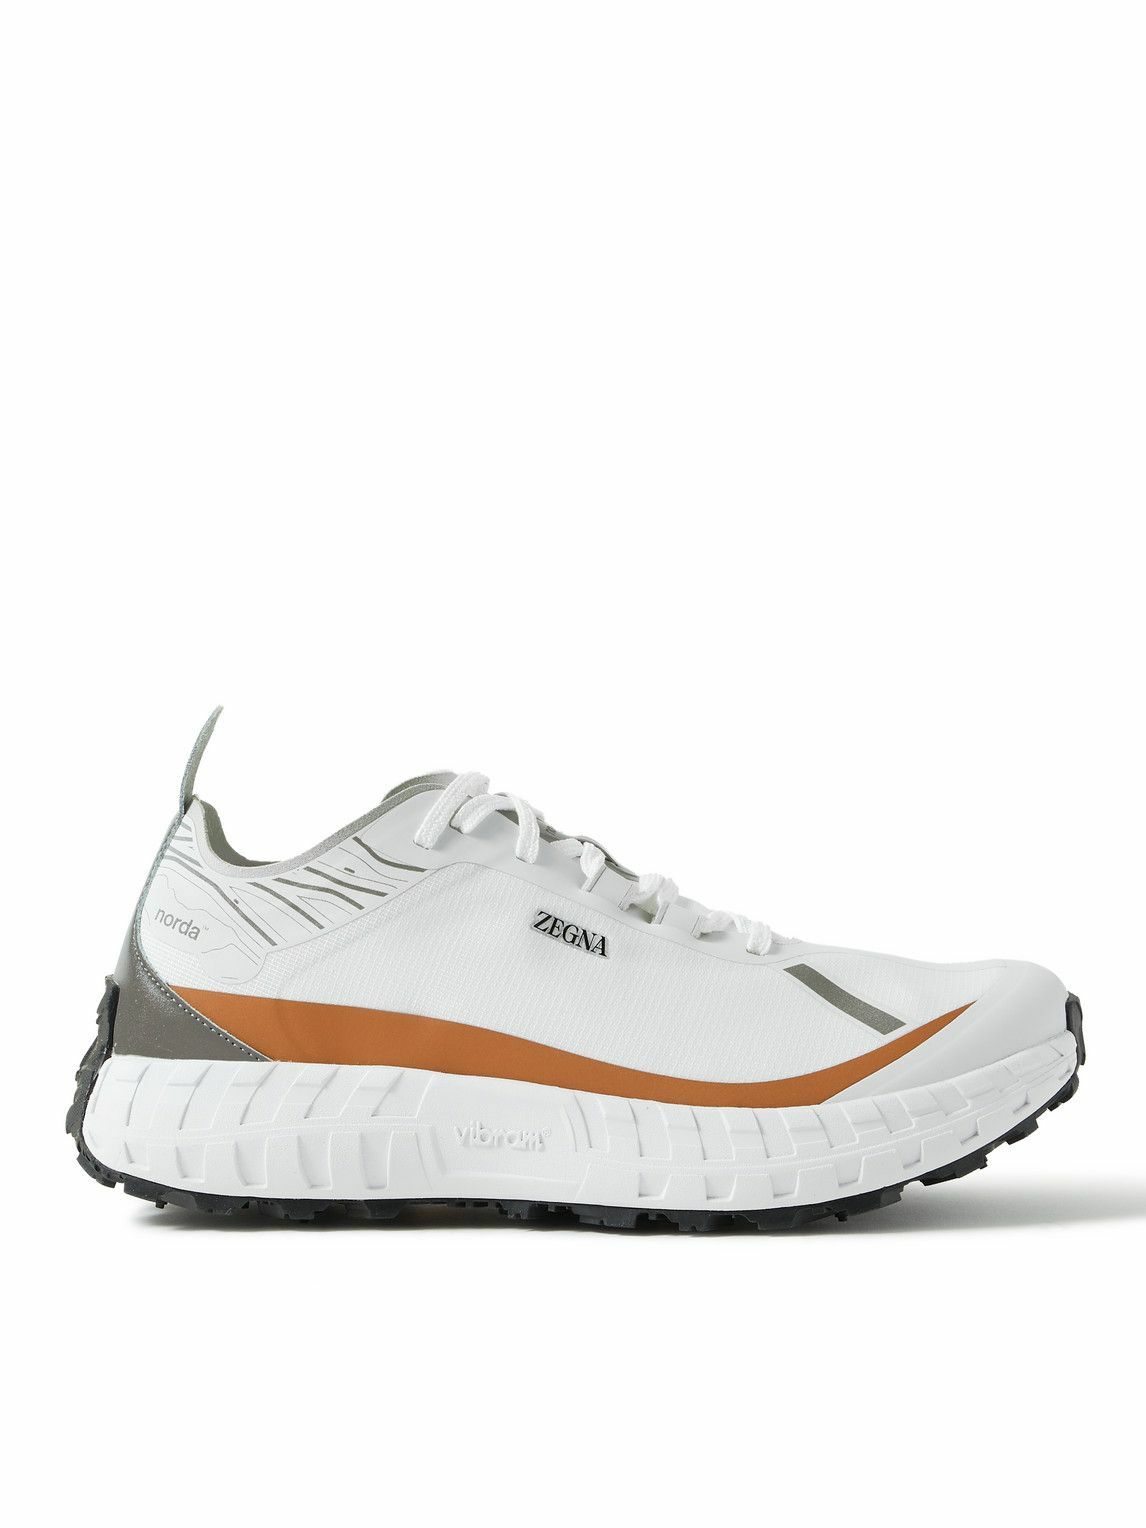 Zegna - norda Rubber-Trimmed Dyneema® Sneakers - White Zegna